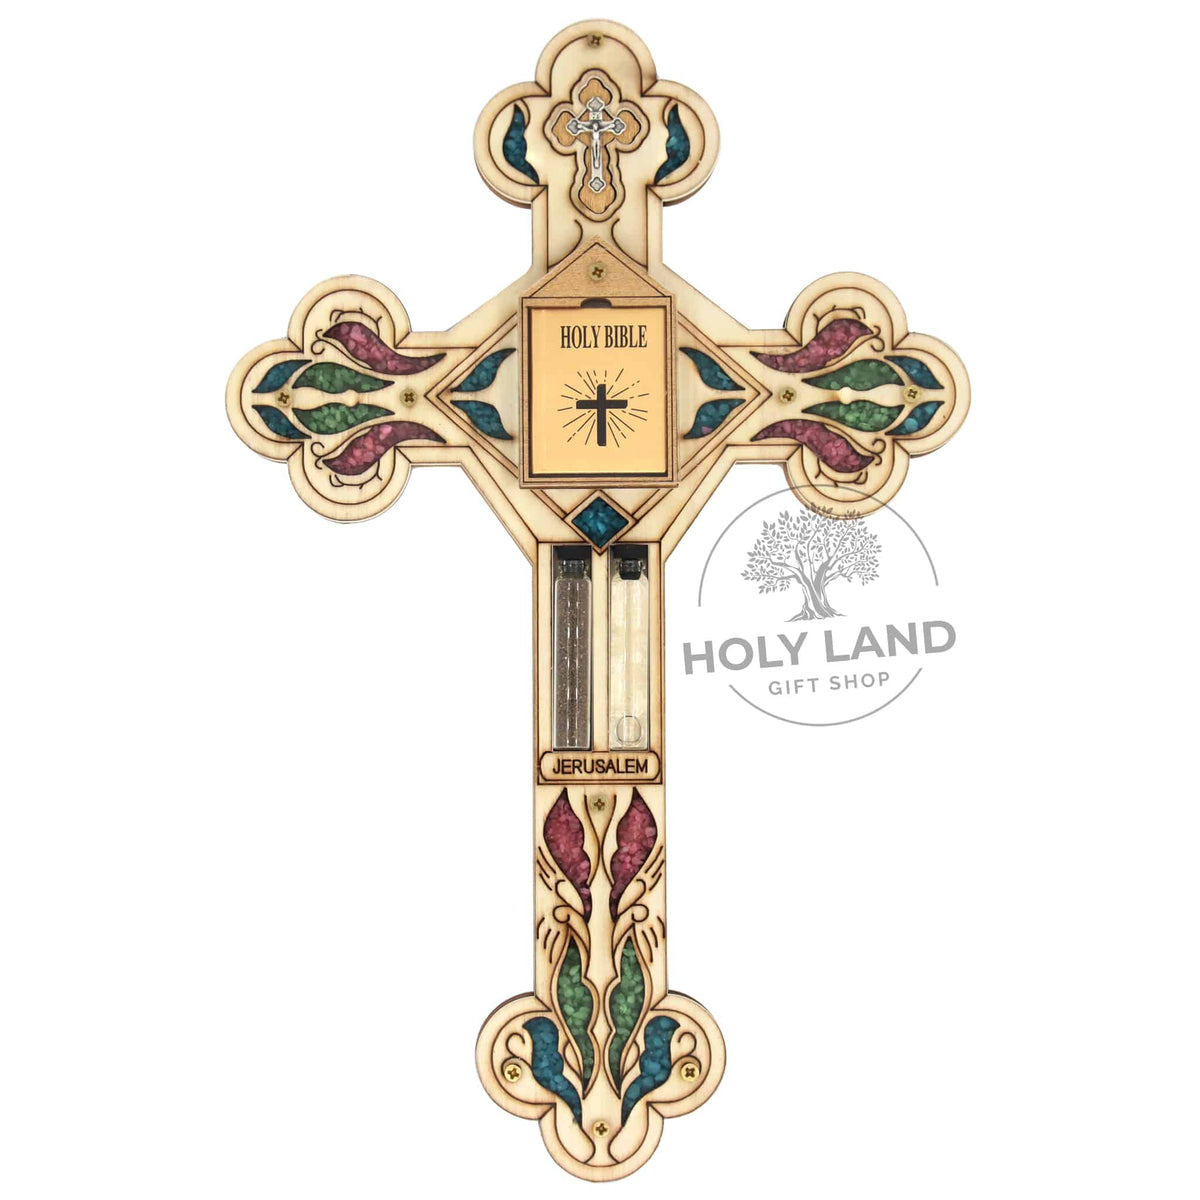 Bless Our Home Floral Design Cherry Wood Cross